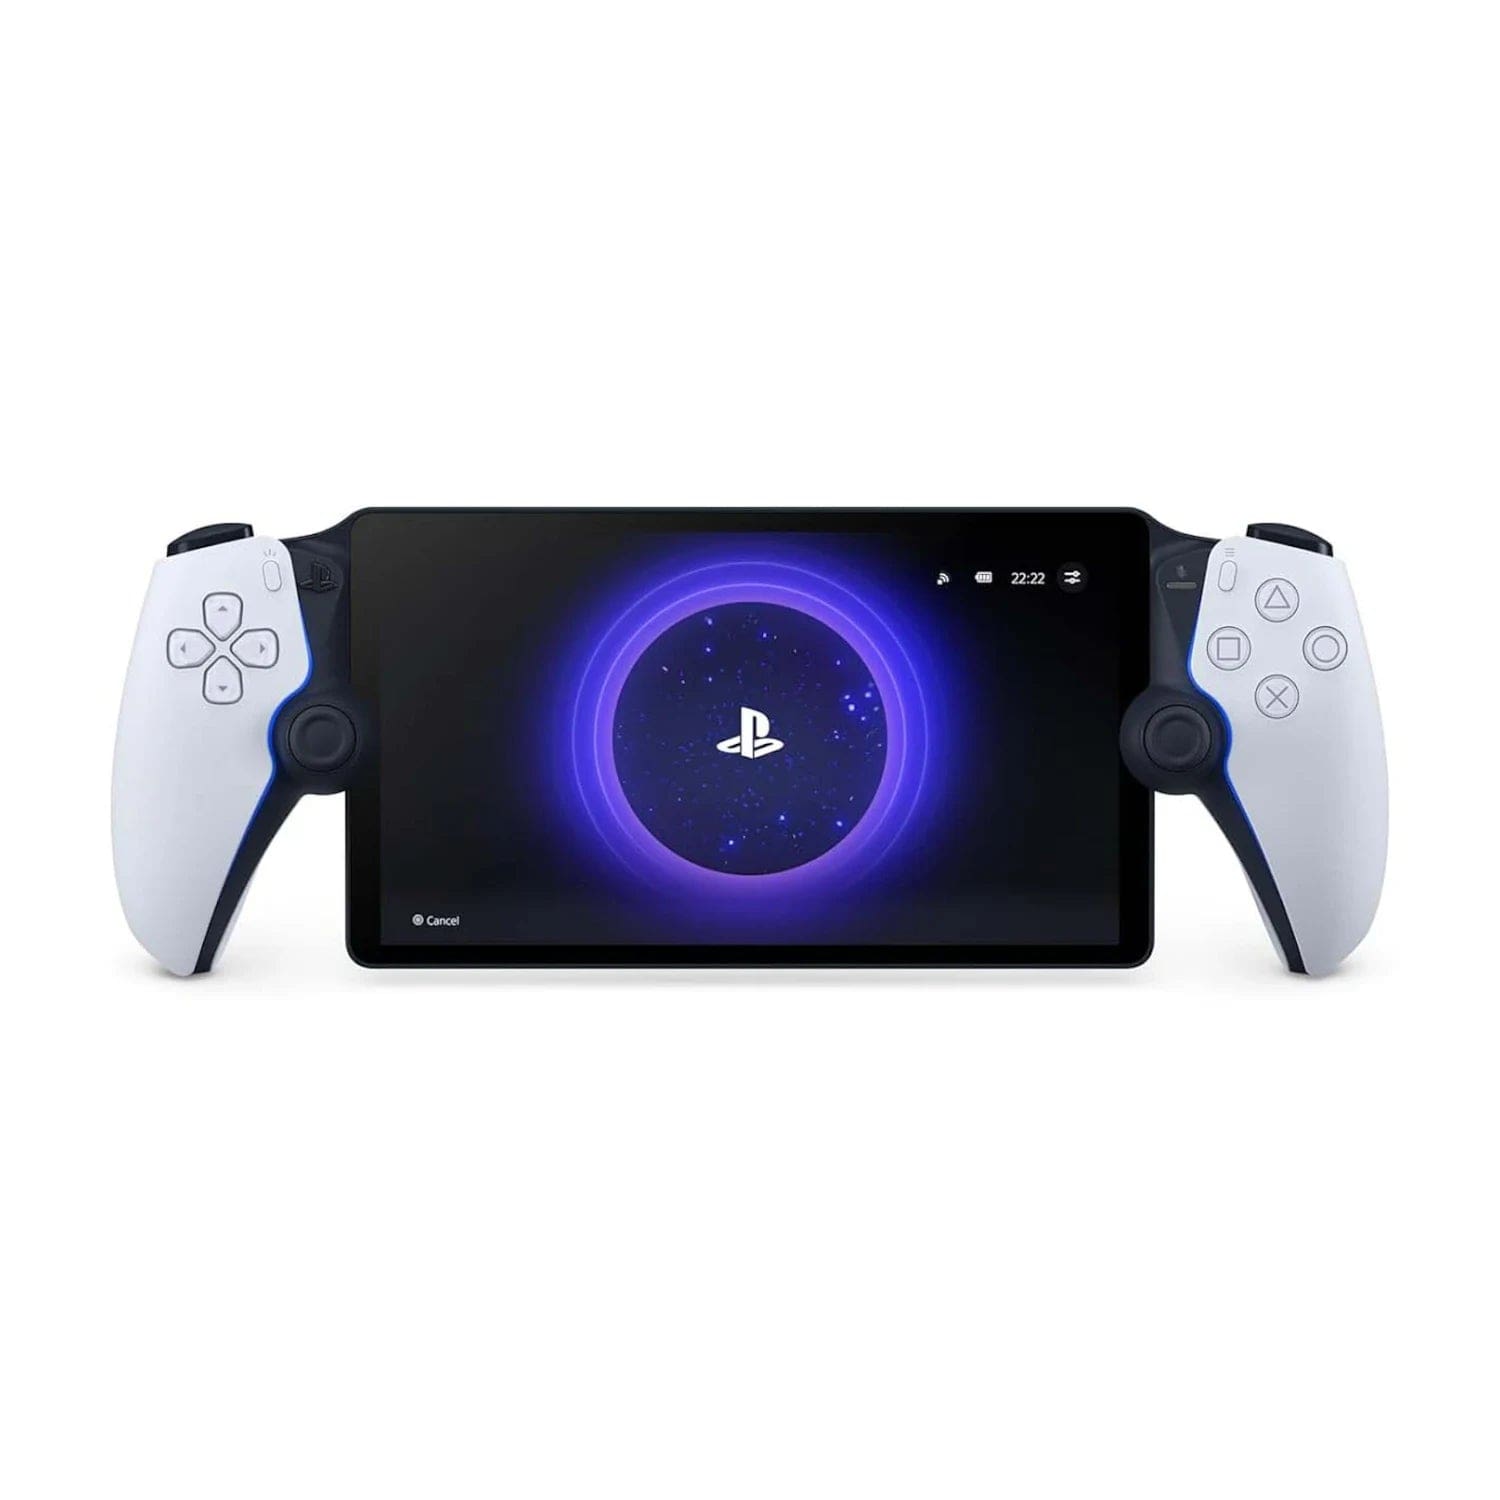 Sony PlayStation Portal Remote Player White - Image 1 - Only at www.BallersClubKickz.com - Sony's PlayStation Portal Remote Player lets you experience cloud gaming anytime, anywhere. This handheld device boasts an 8-inch LCD screen with 1080p resolution, DualSense features, USB-C port, speakers, 3.5mm headphone jack, Wi-Fi connectivity and is priced at an affordable $199.99. Immerse yourself in the closest PS5 gaming experience while on-the-go.